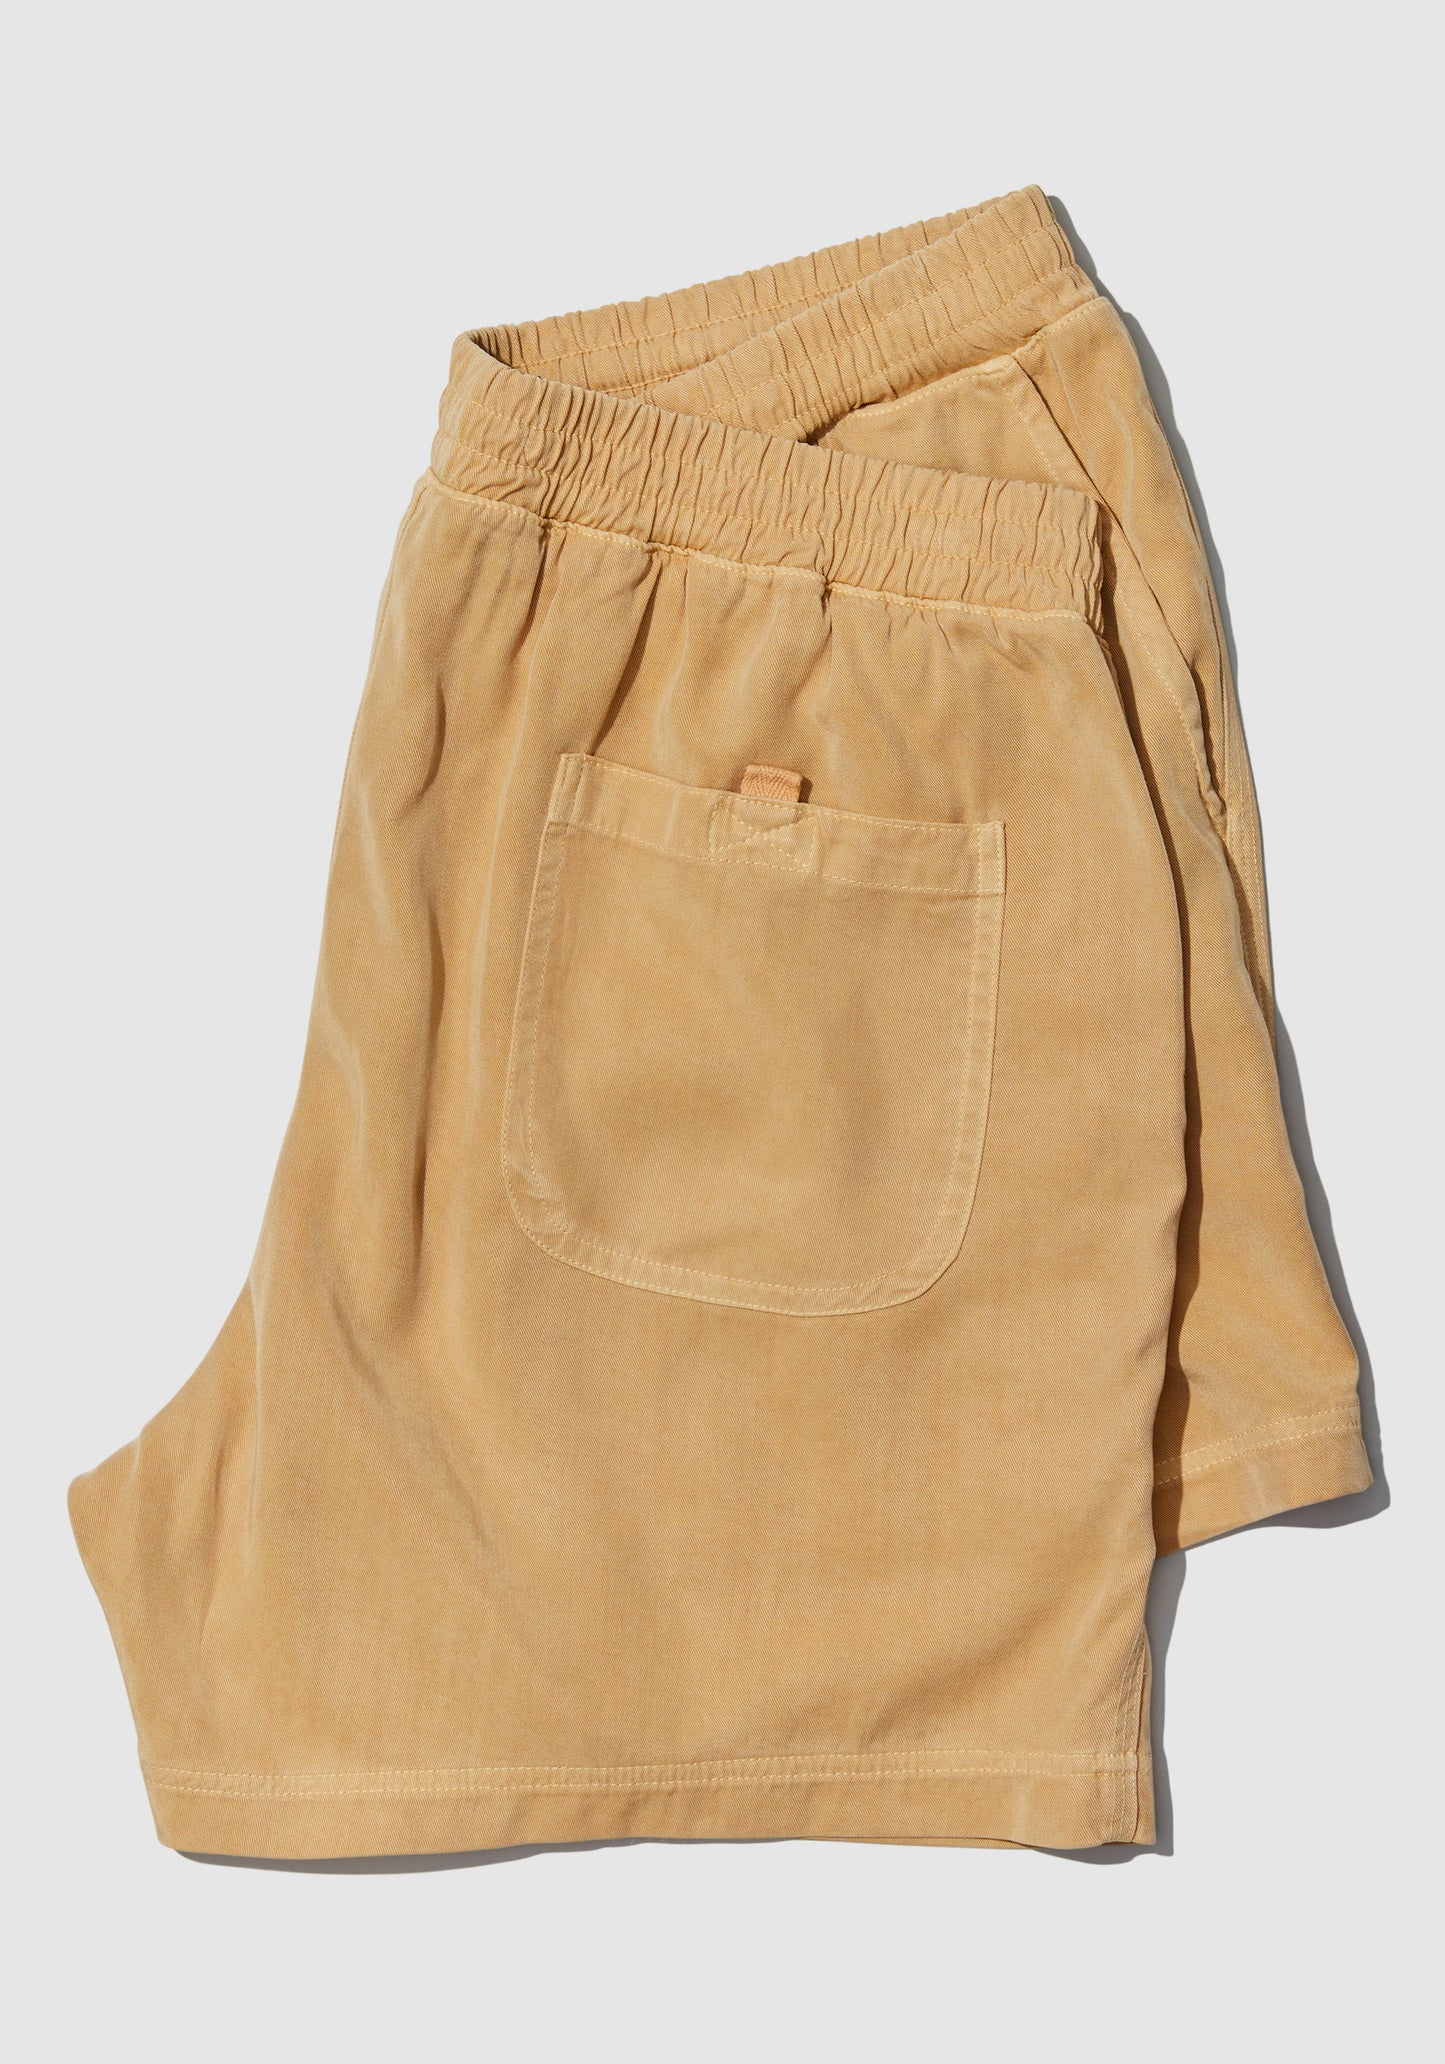 Upcycled shorts, eco-sustainable fashion, sustainable materials, made in LA, mens trunks, mens shorts, rayon shorts, androgynous fashion, rayon trunk, barley trunks RNF